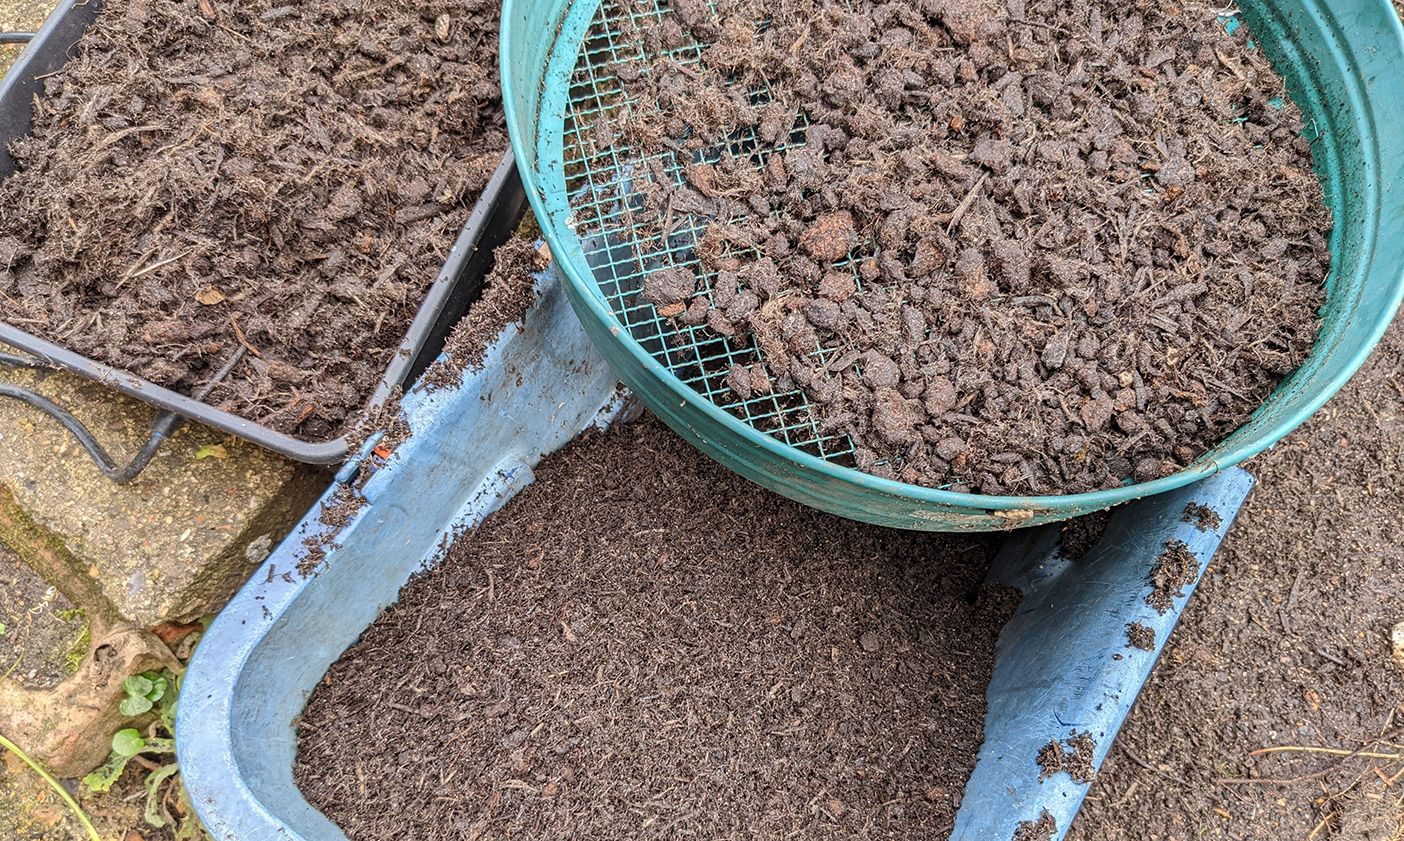 Compost lumps and bumps caught in the riddle and discarded into a tray for mulching